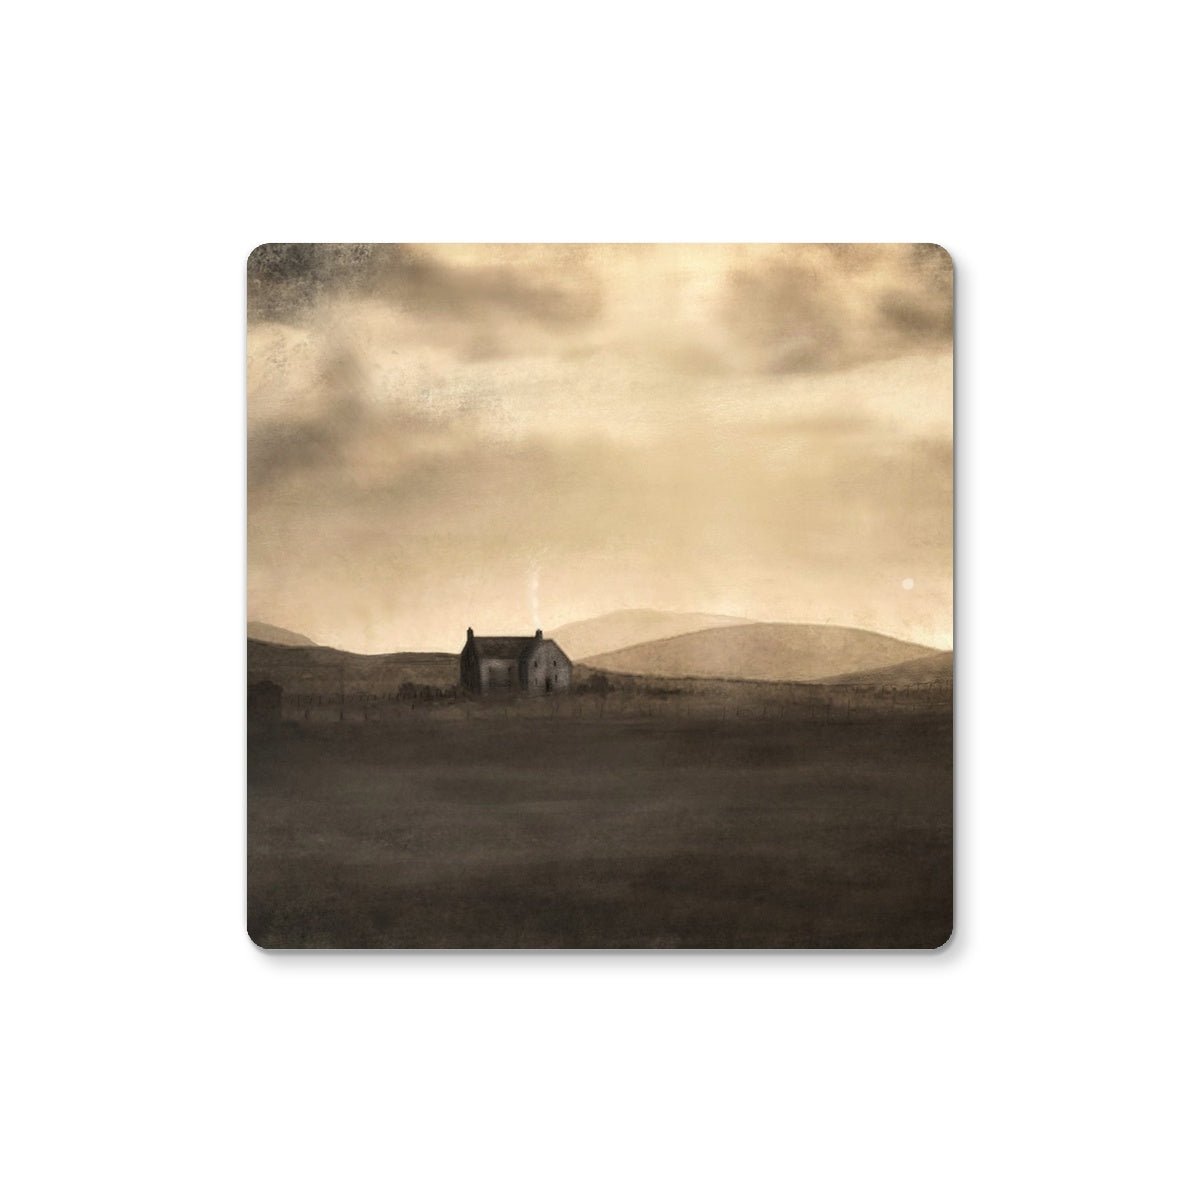 A Moonlit Croft Art Gifts Coaster-Coasters-Hebridean Islands Art Gallery-Single Coaster-Paintings, Prints, Homeware, Art Gifts From Scotland By Scottish Artist Kevin Hunter